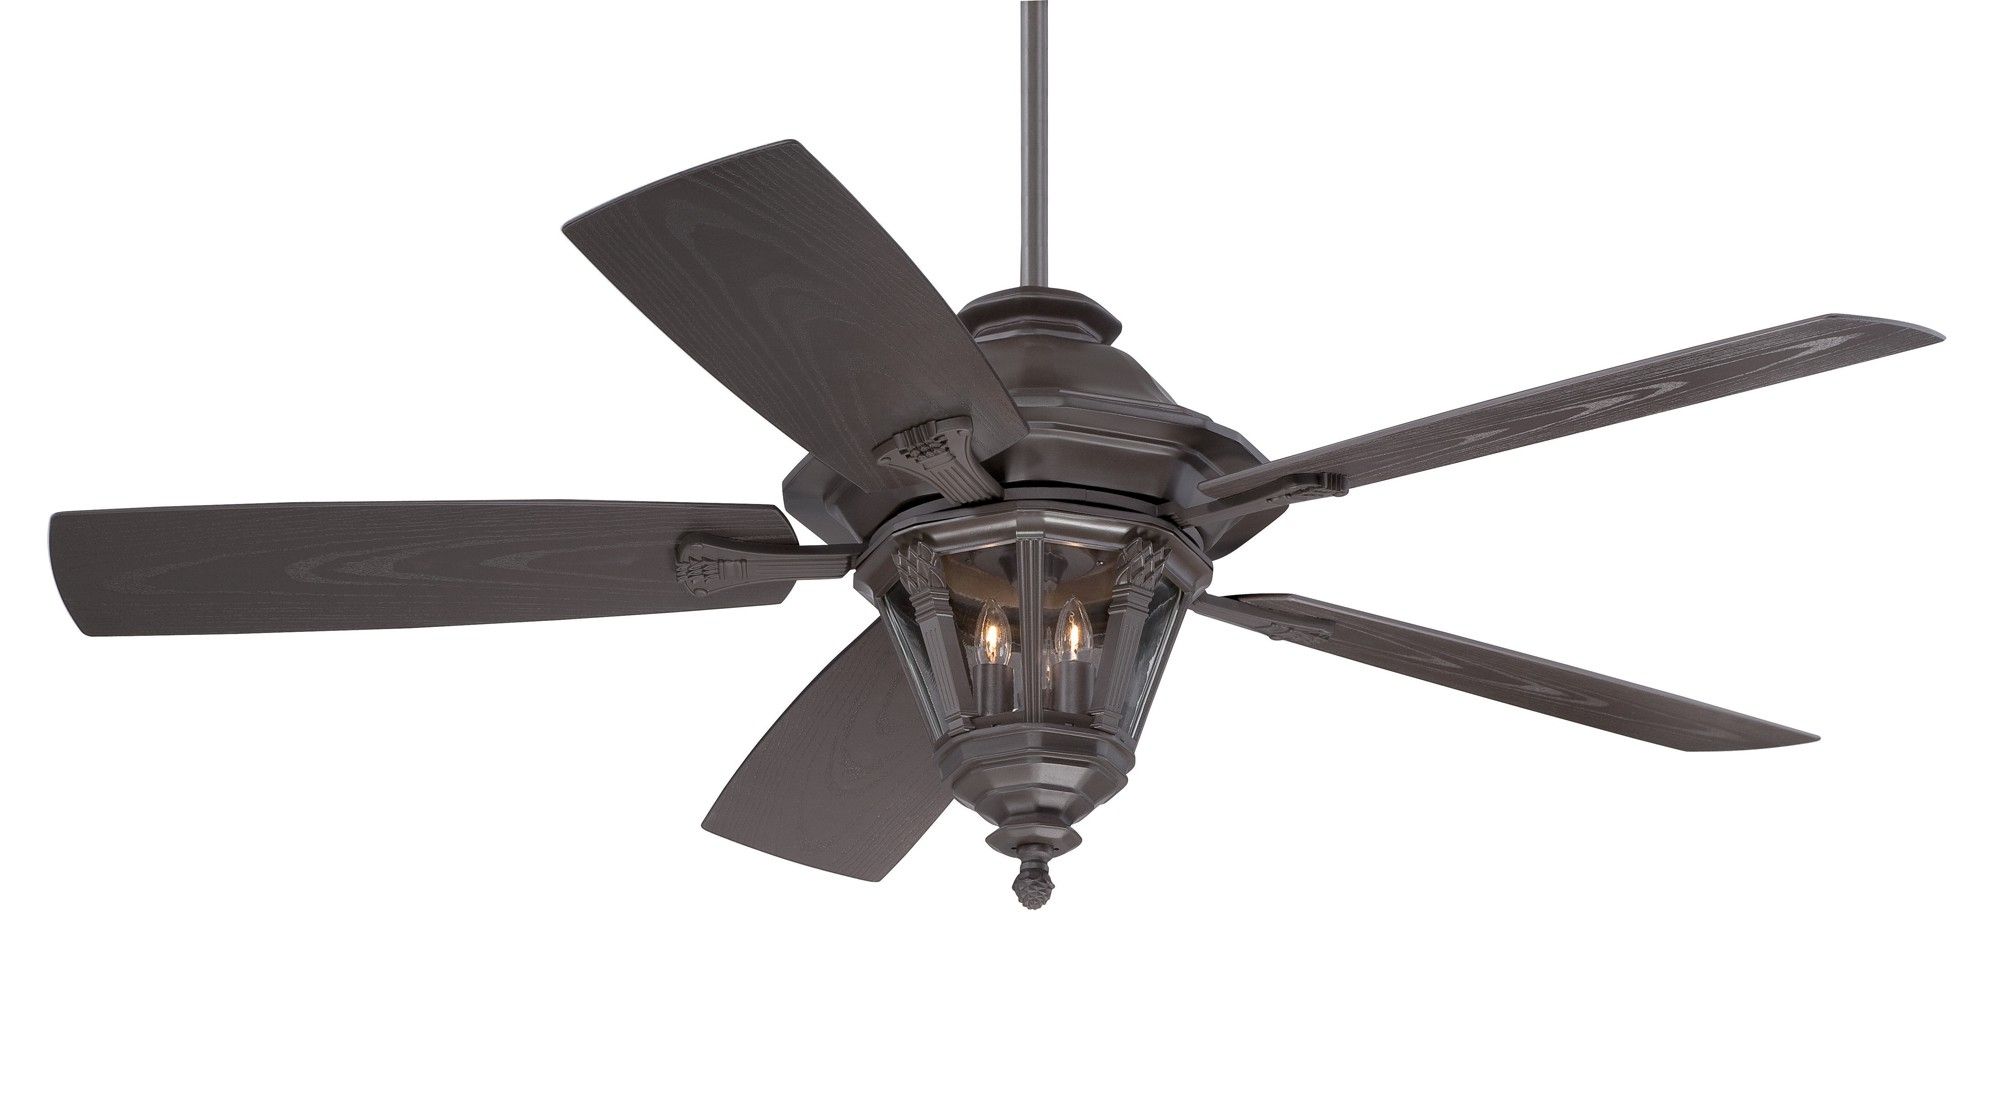 Top 10 Unique Outdoor Ceiling Fans 2018 Warisan Lighting, Best Pertaining To Trendy Outdoor Ceiling Fans With Lantern Light (View 1 of 20)